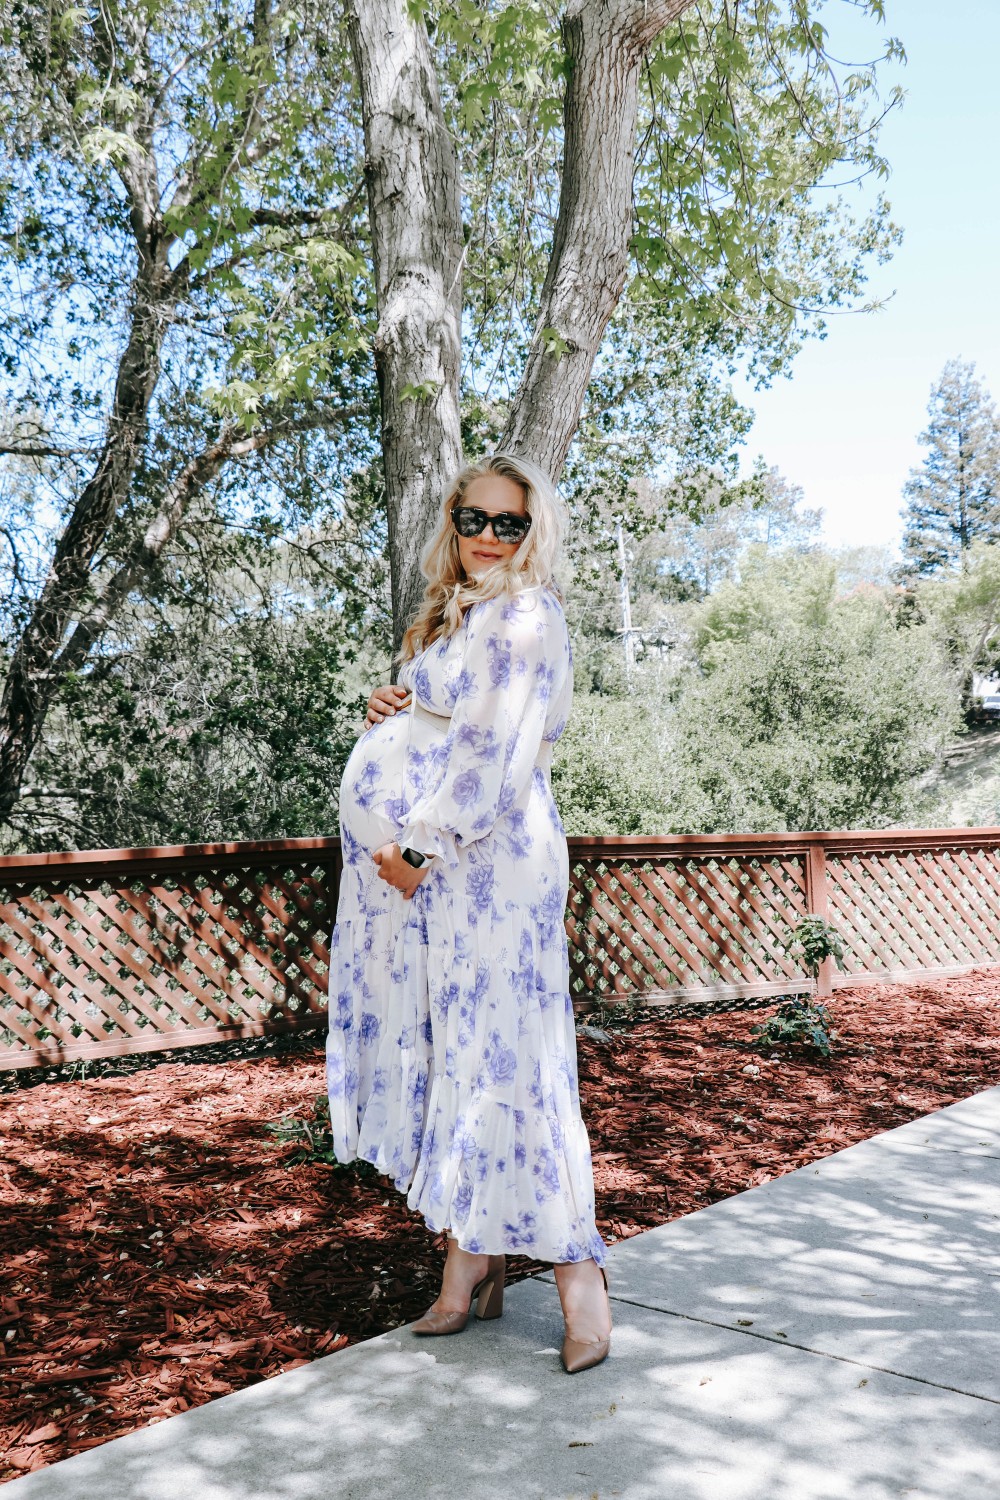 Great Pregnancy Style. I hope I am this stylish and chic while pregnant.  More